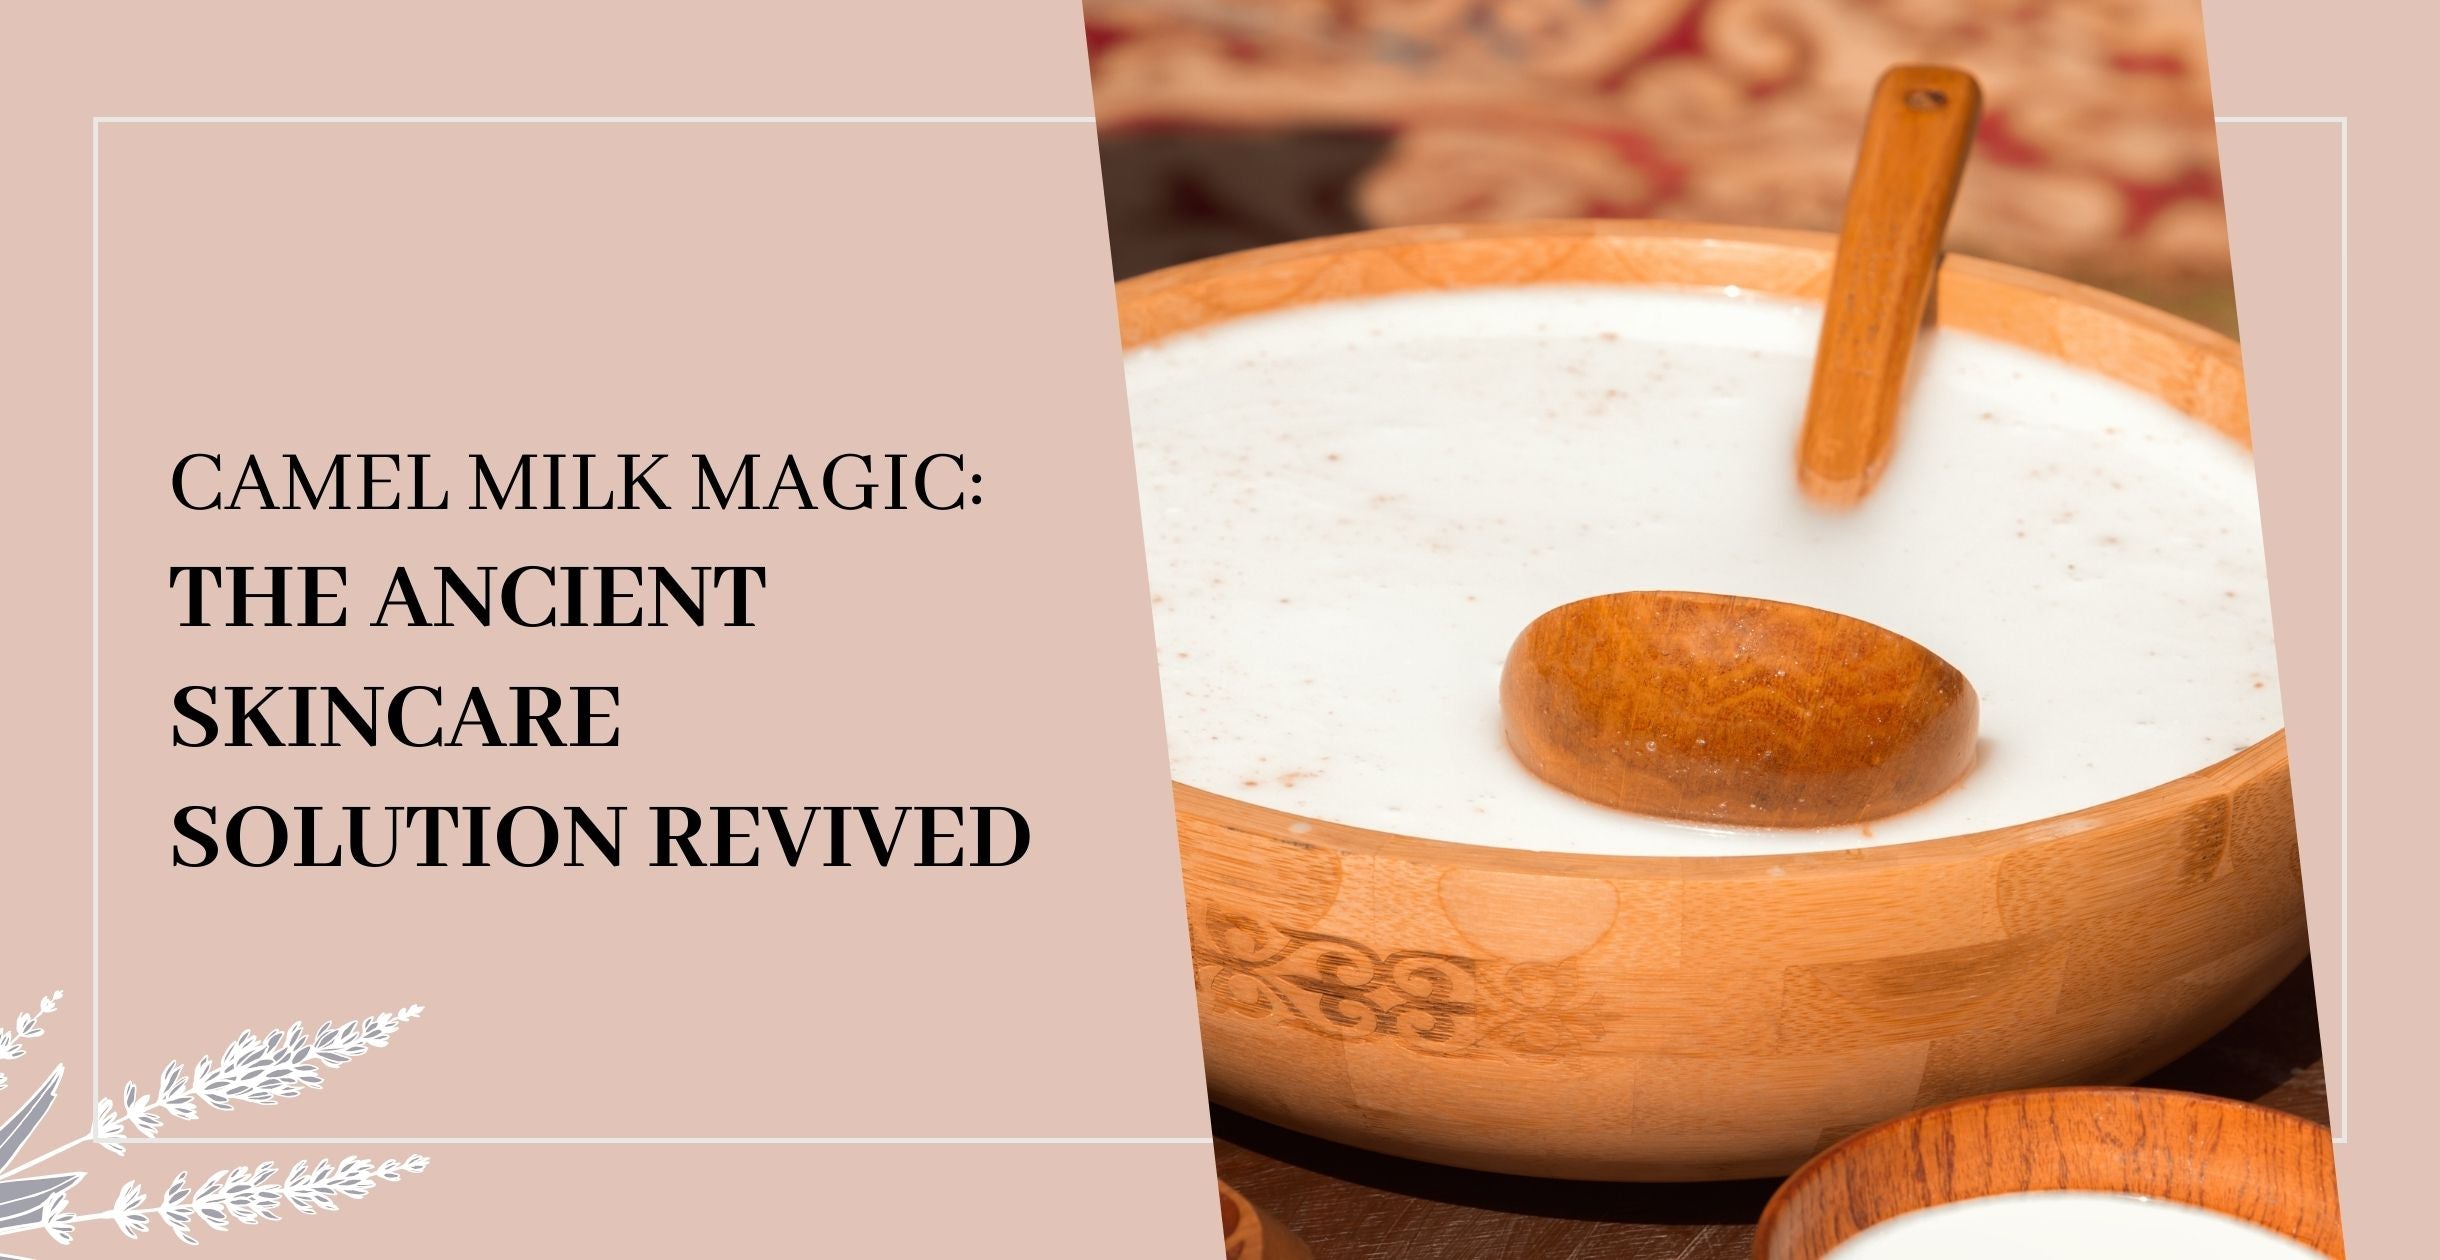 Camel Milk Magic: The Ancient Skincare Solution Revived